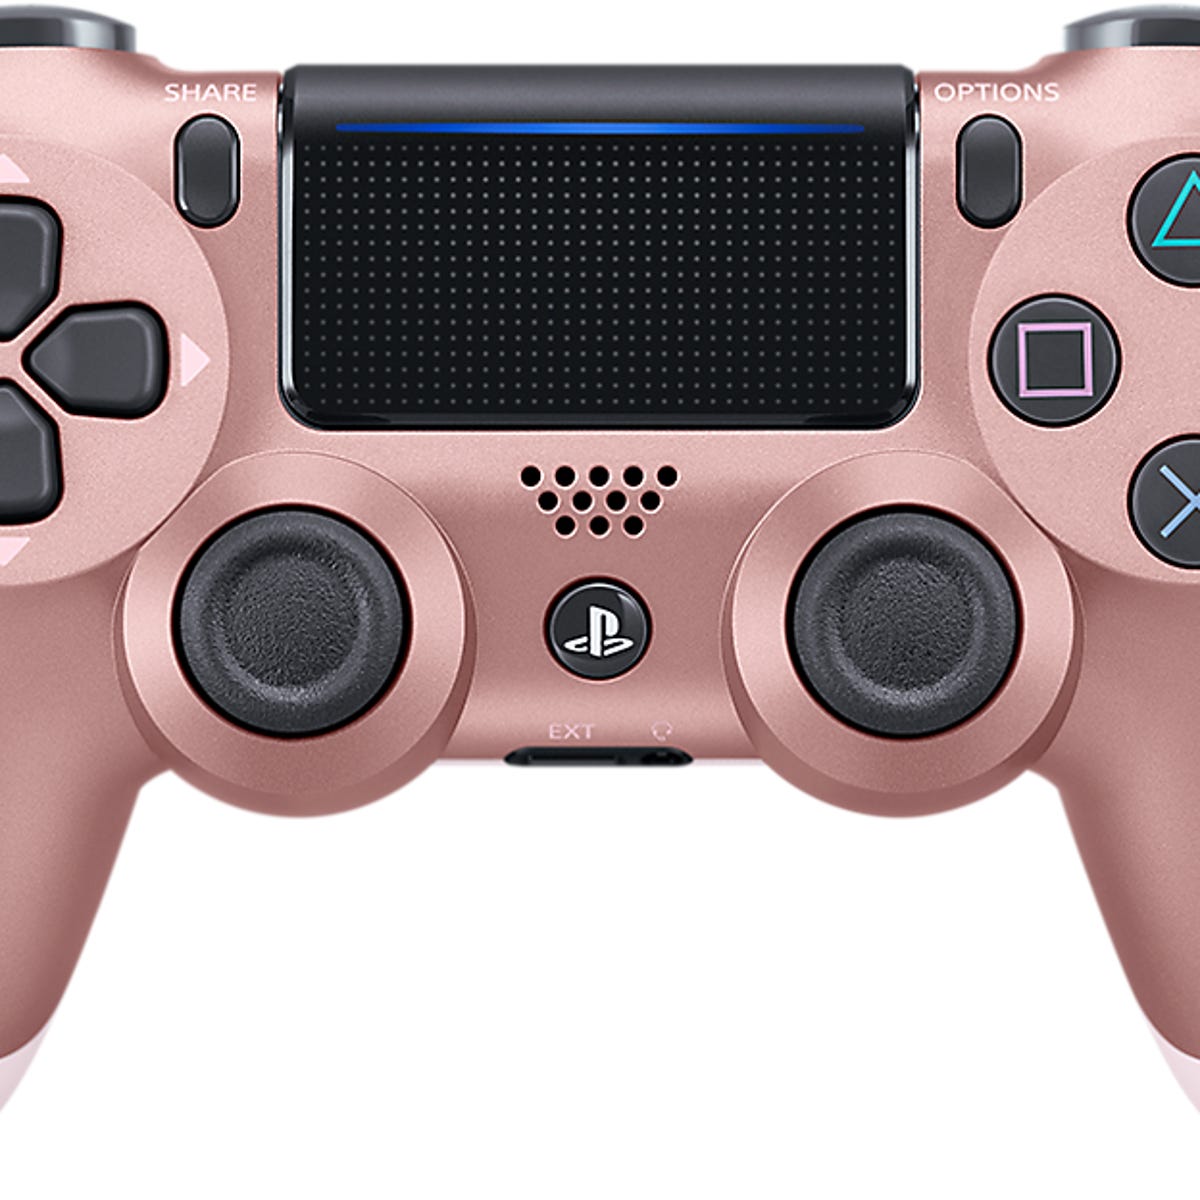 PlayStation getting a rose gold CNET